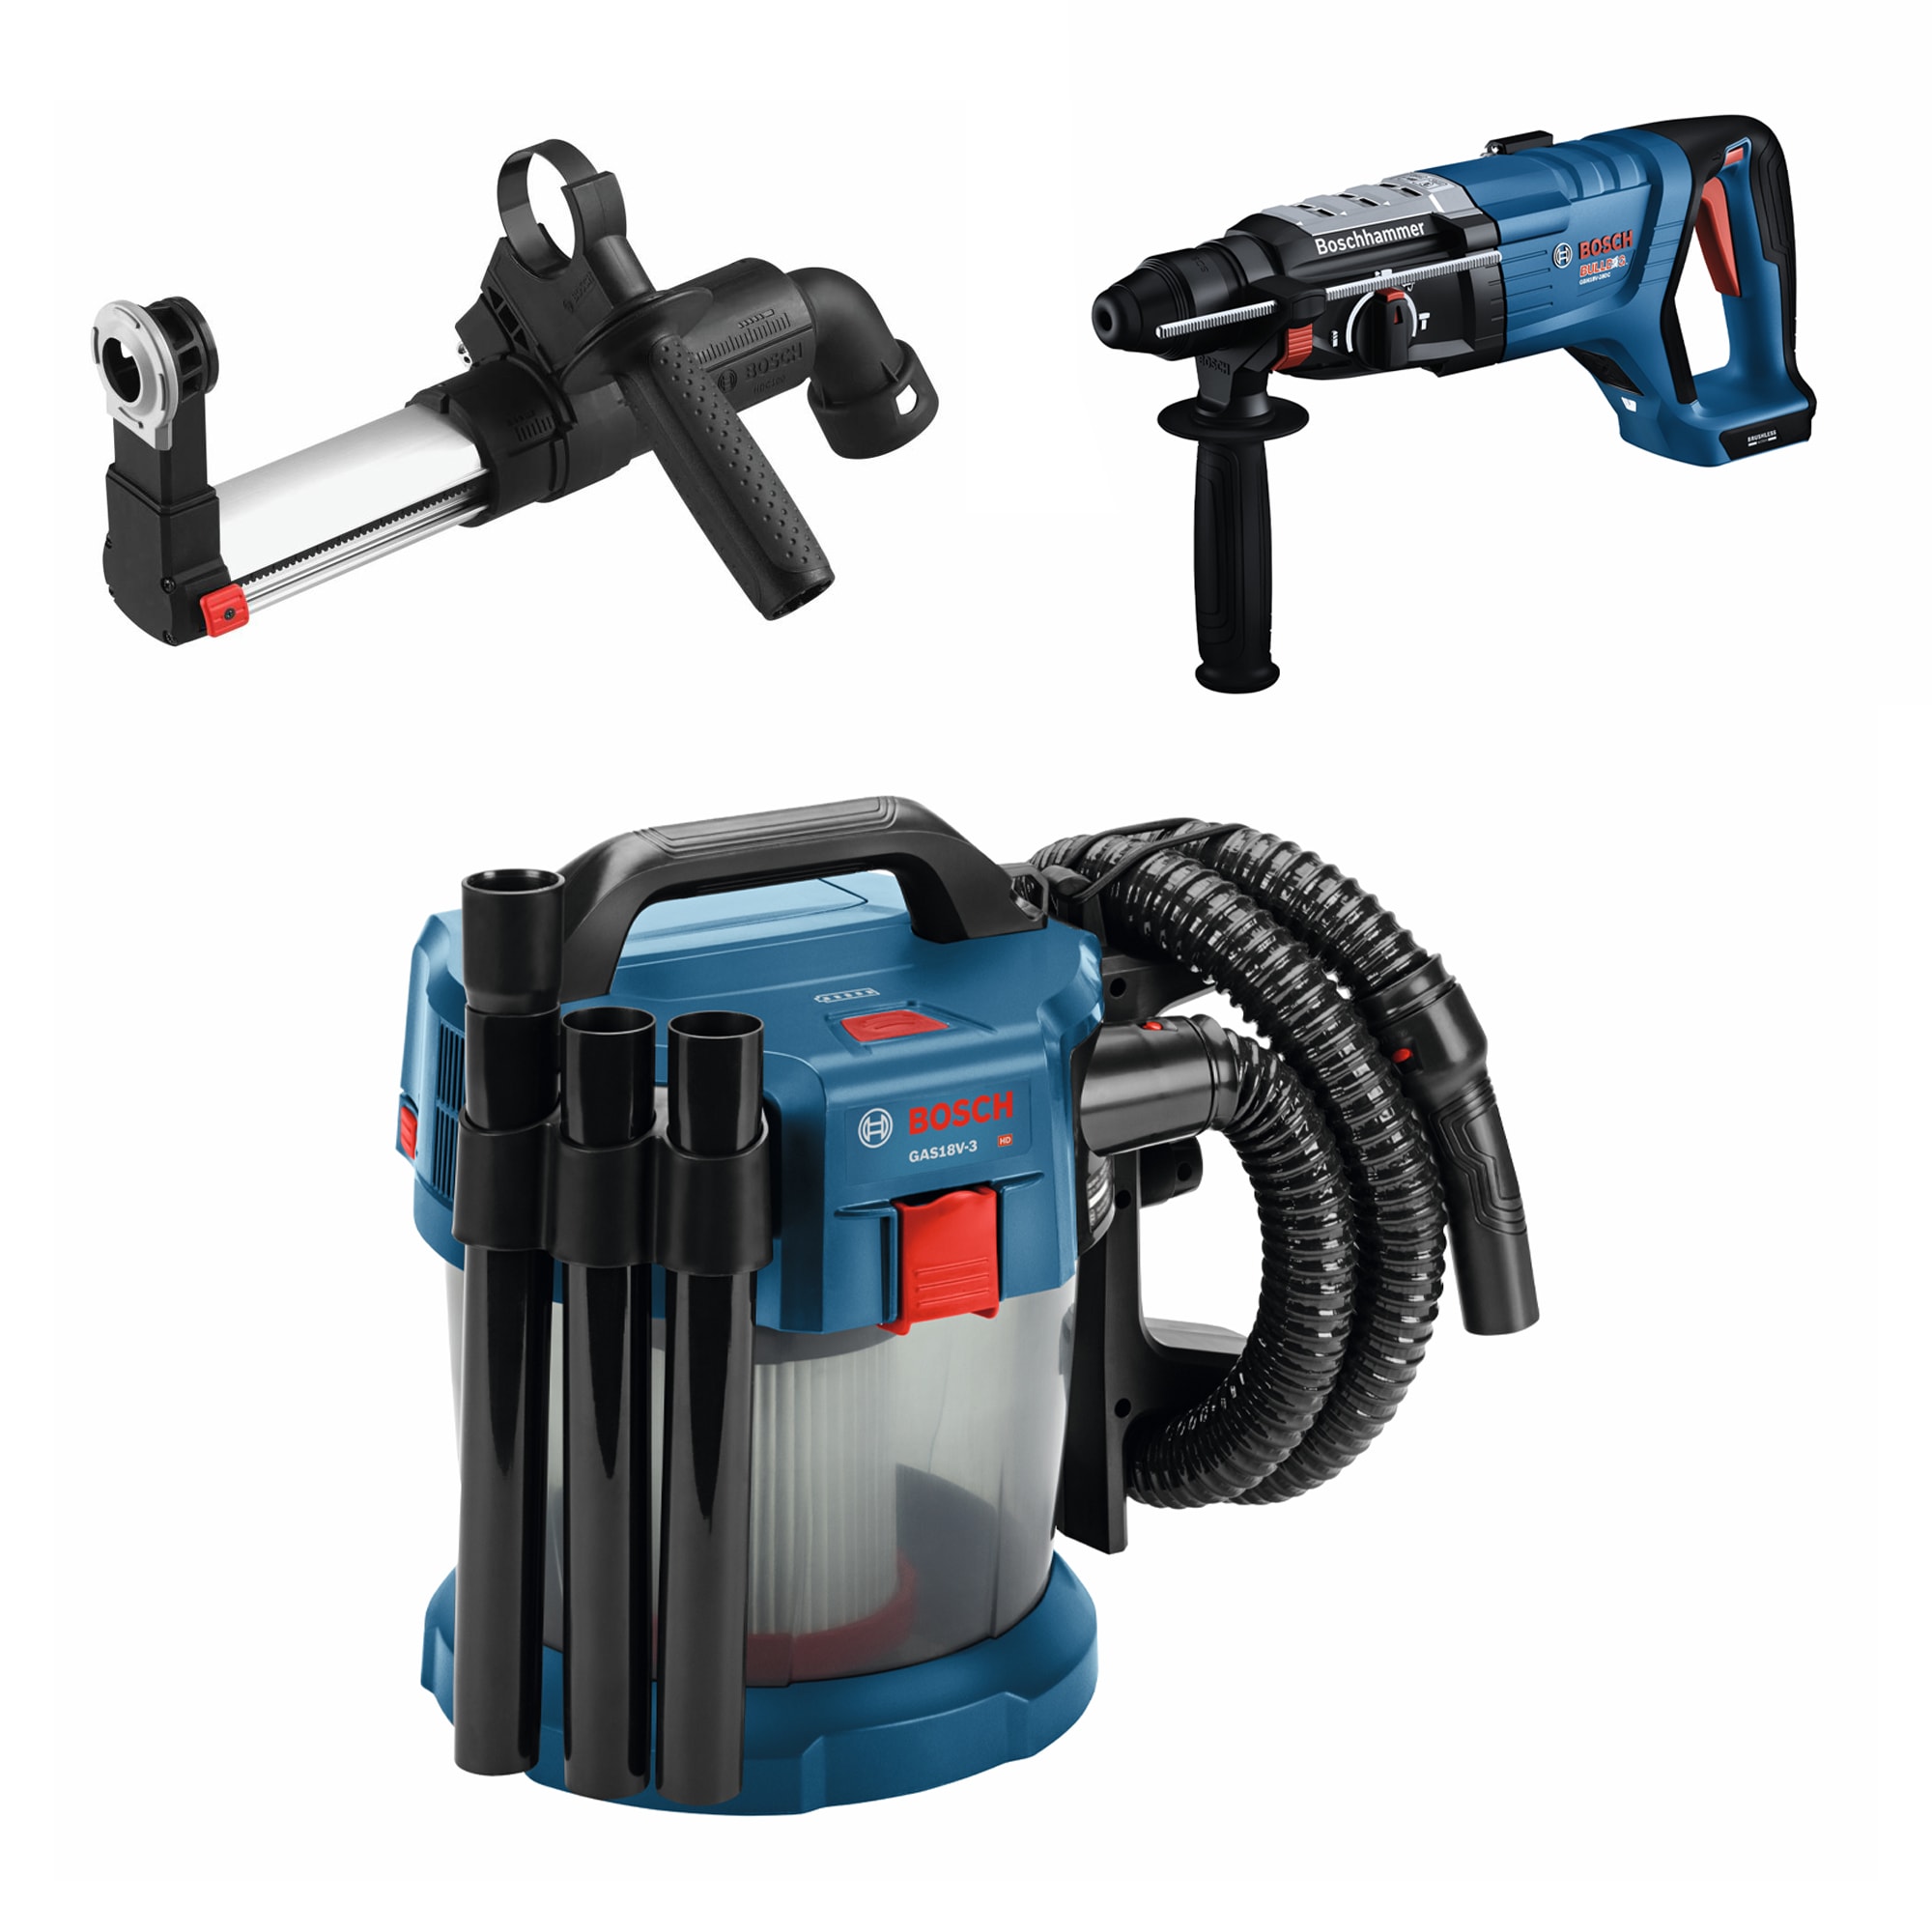 Bosch GBH18V-28DCN 18V Brushless SDS-plus Bulldog™ 1-1/8 In. Rotary Hammer  (Bare Tool), HDC100 SDS-Plus Dust Collection Attachment, and GAS18V-3N 18V 